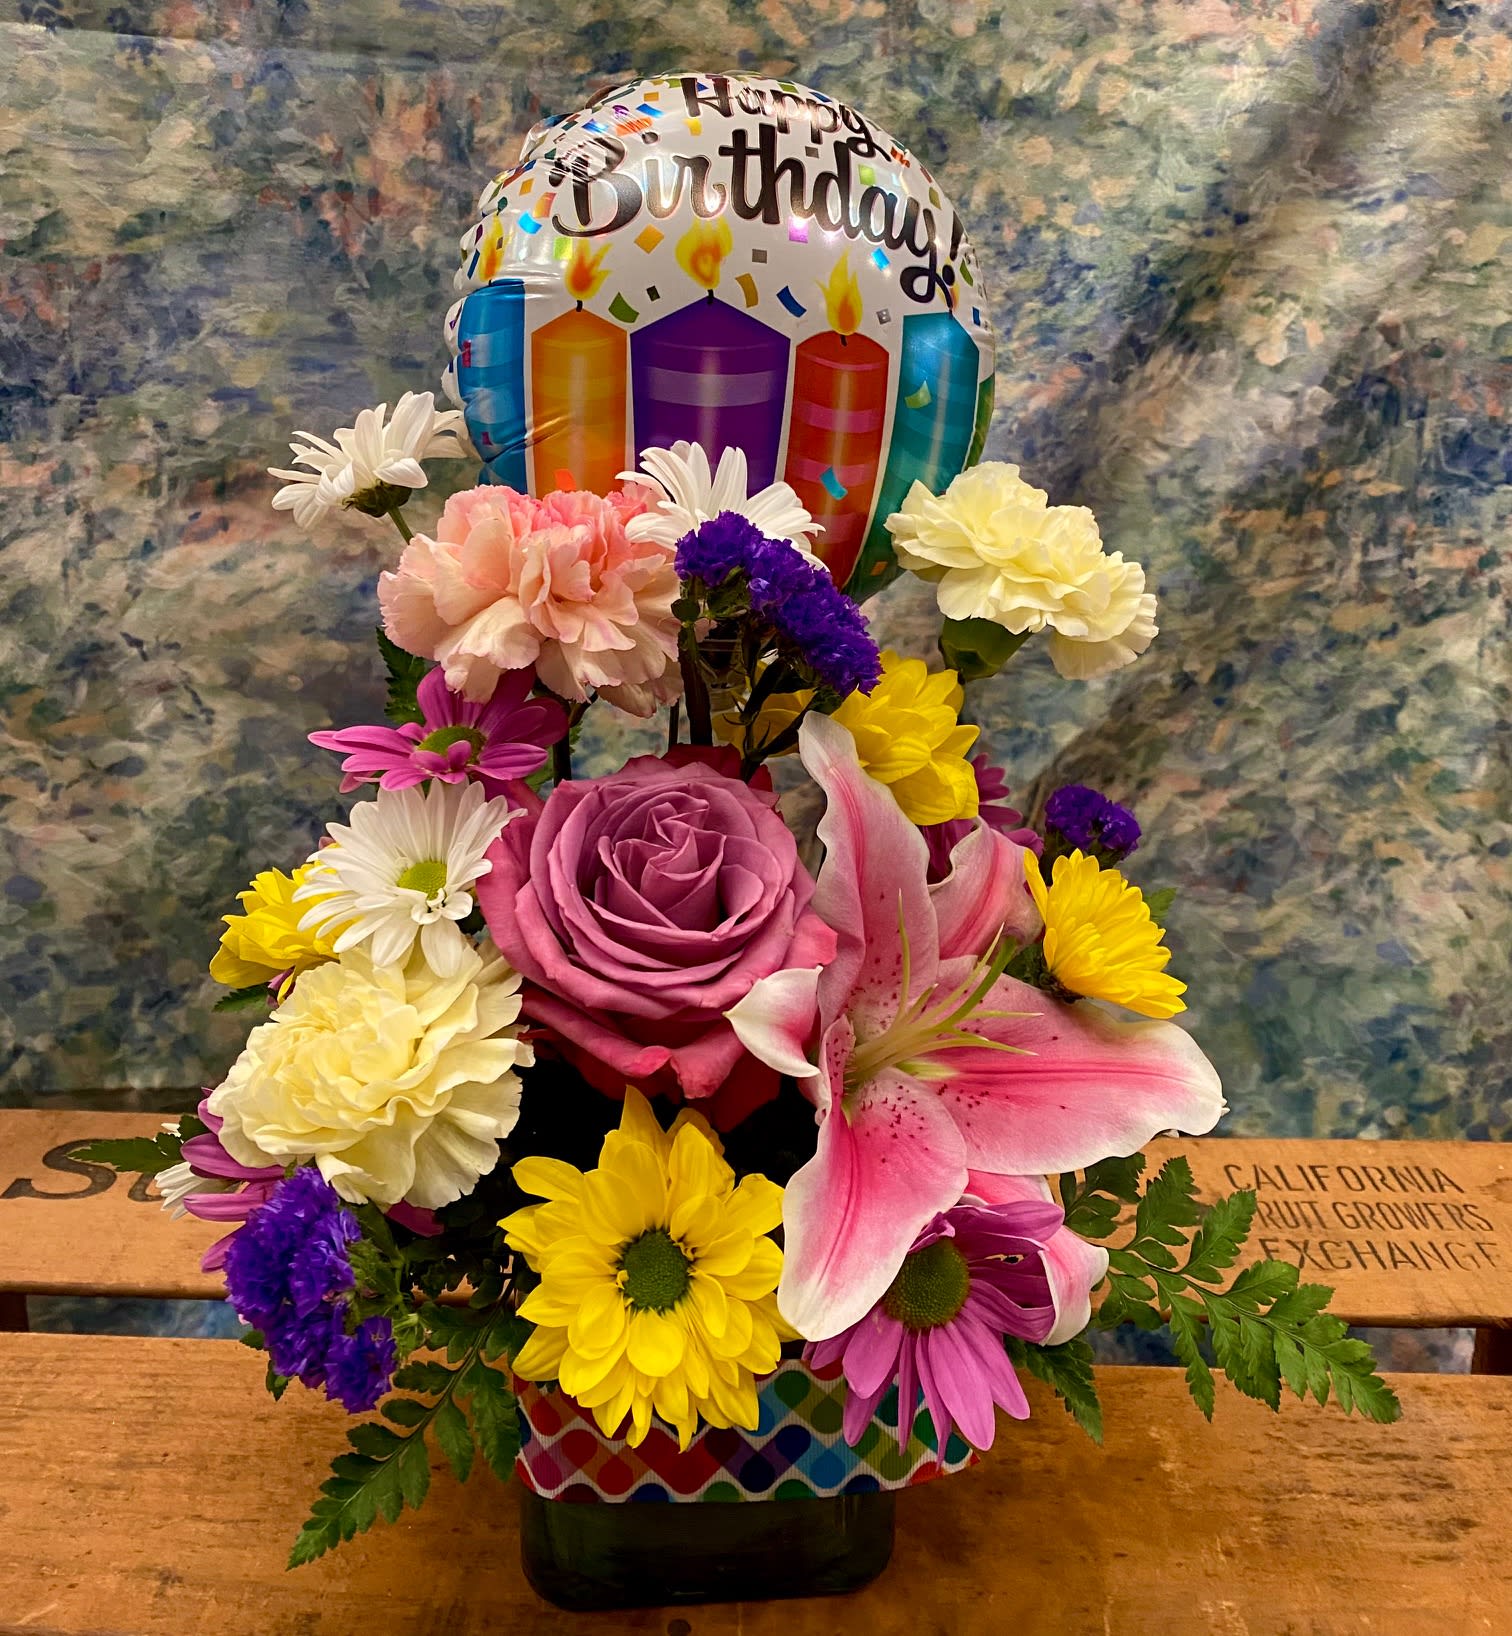 Birthday Cheer - A glass cube filled with colorful blooms and a small Happy Birthday air-filled balloon. A celebration for the eyes and the heart!  We are proud to deliver our flower creations to the Kenosha, Somers, and Pleasant Prairie area. With over 55 years of combined flower design experience in Kenosha, Wisconsin, A Summer's Garden Florist and Gifts is the perfect choice for the freshest flowers, most creative design and exceptional customer service.